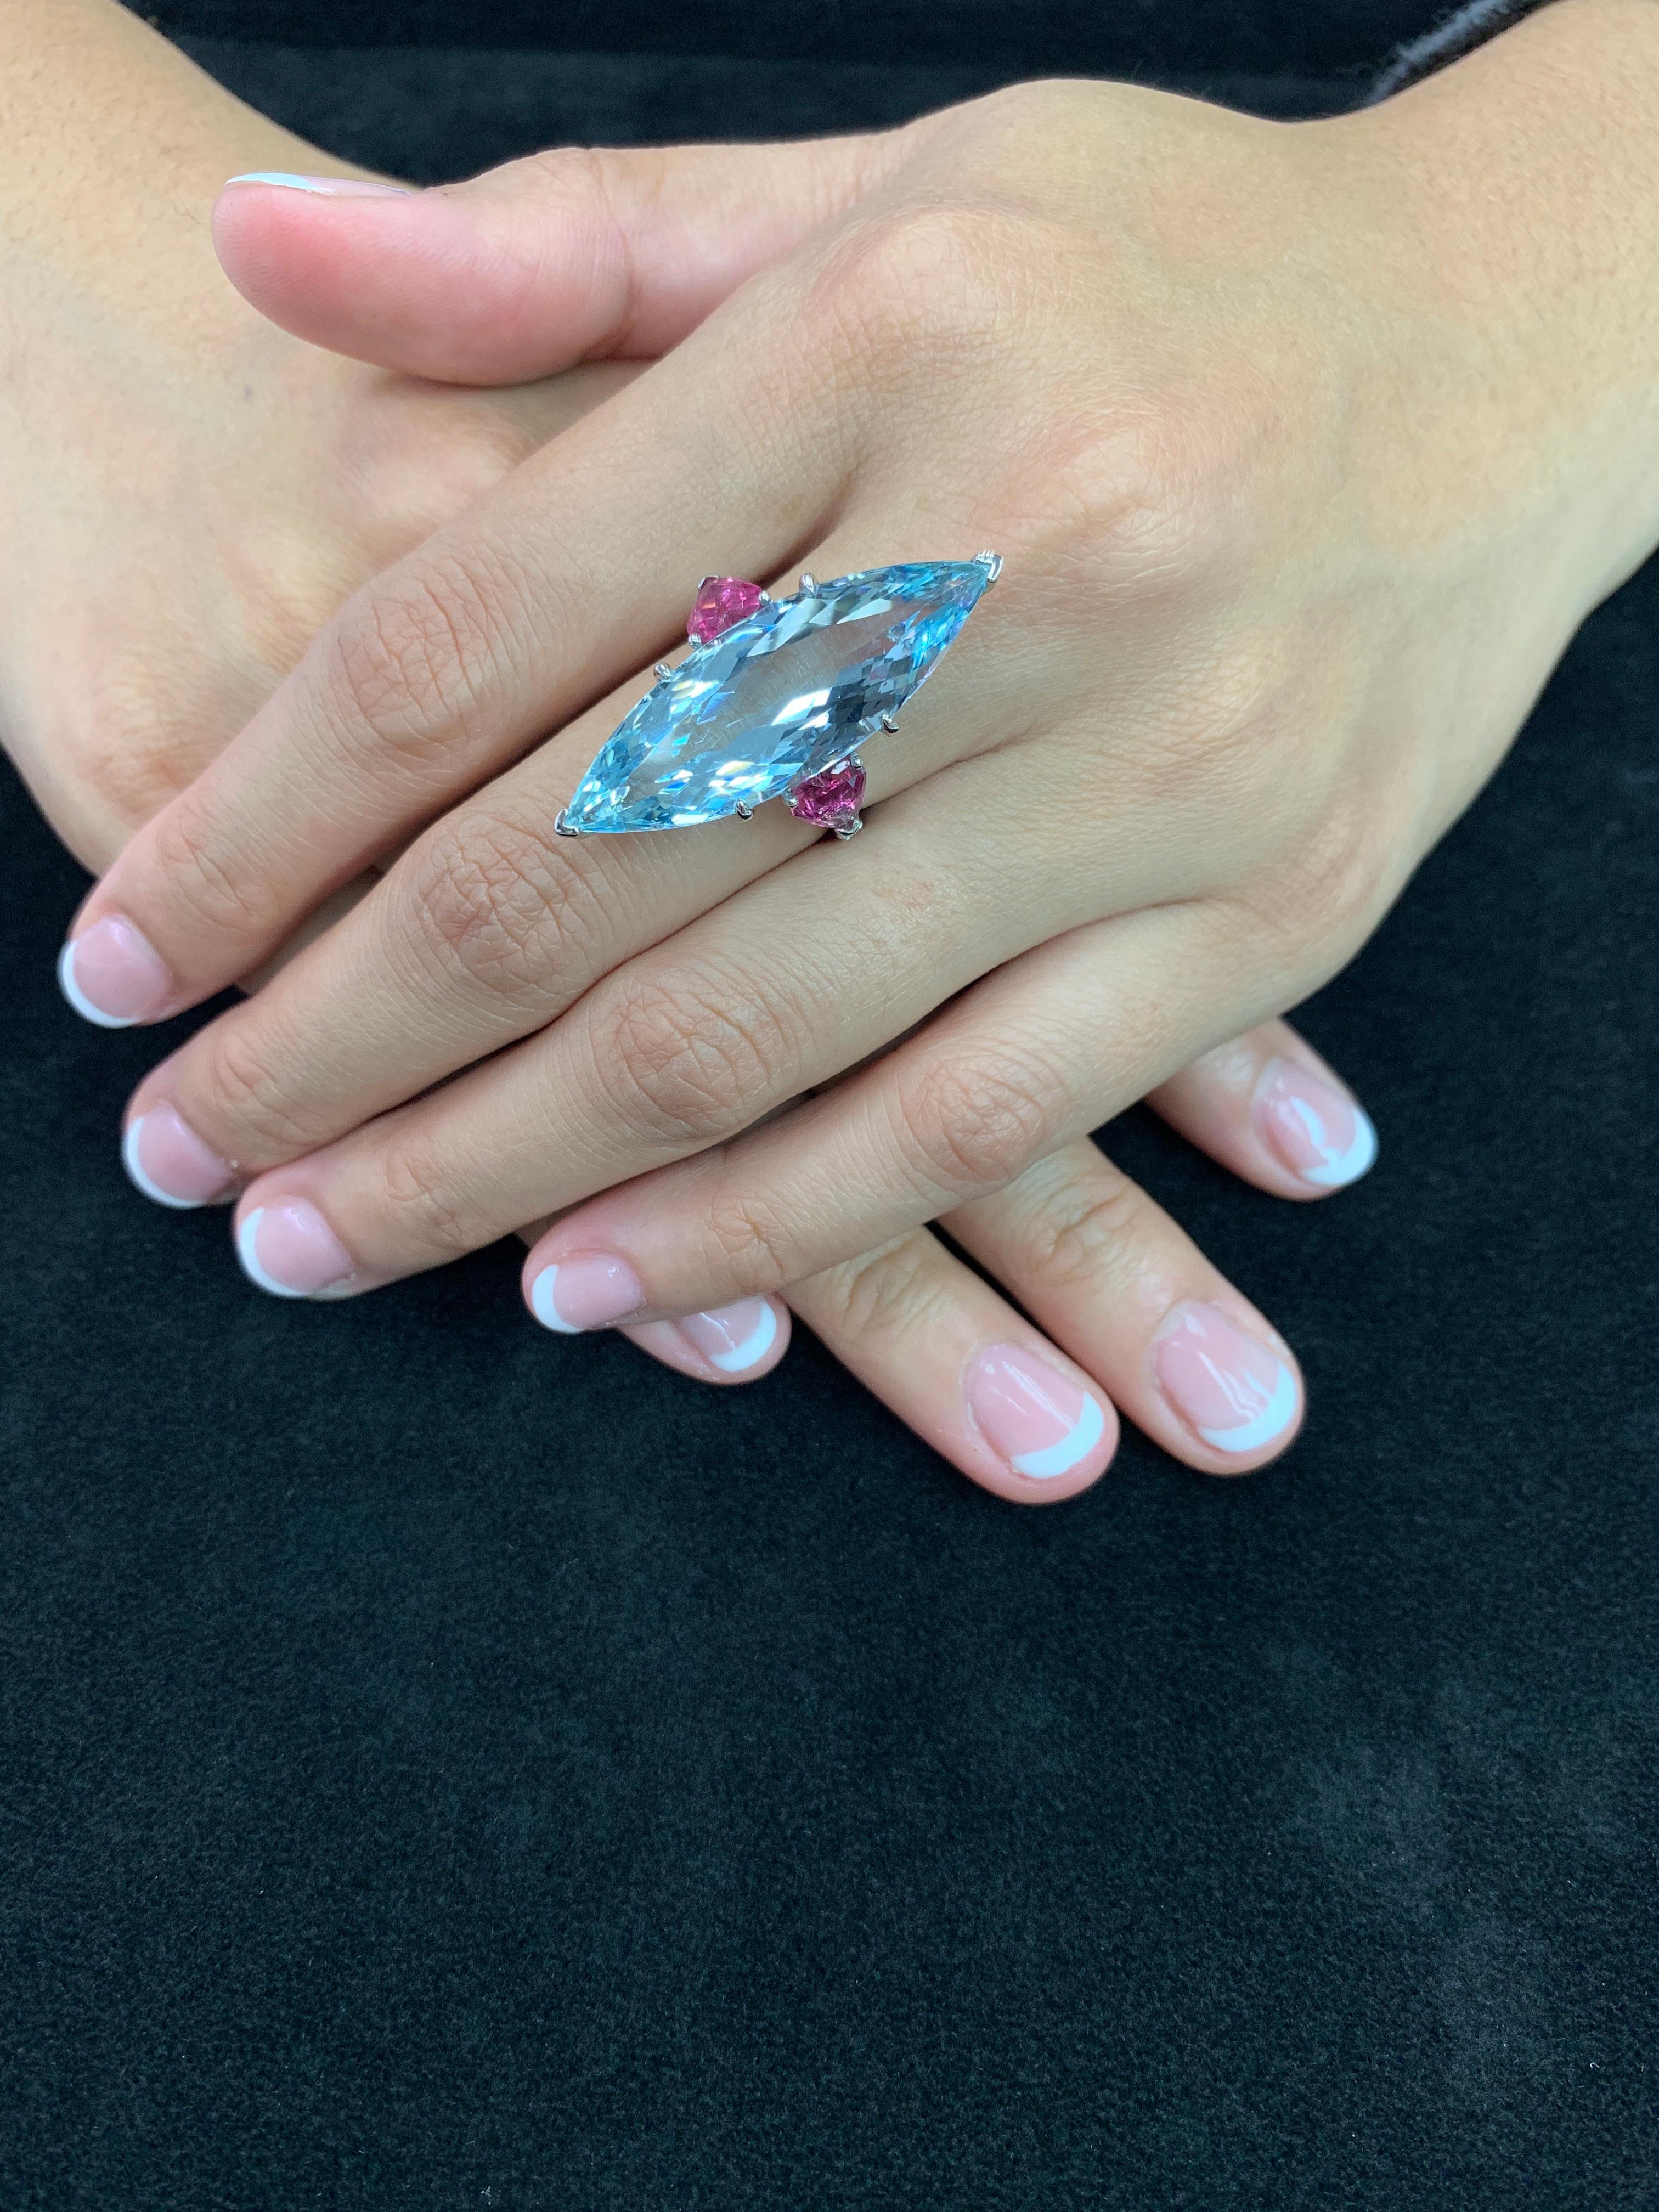 This is a STATEMENT piece! Here is a super nice certified natural Aquamarine ring. Unique is an understatement. The center Aquamarine is 16 Cts. Not only is it oversized, the clarity is exceptional. The unique oversized Marquis shape aquamarine with